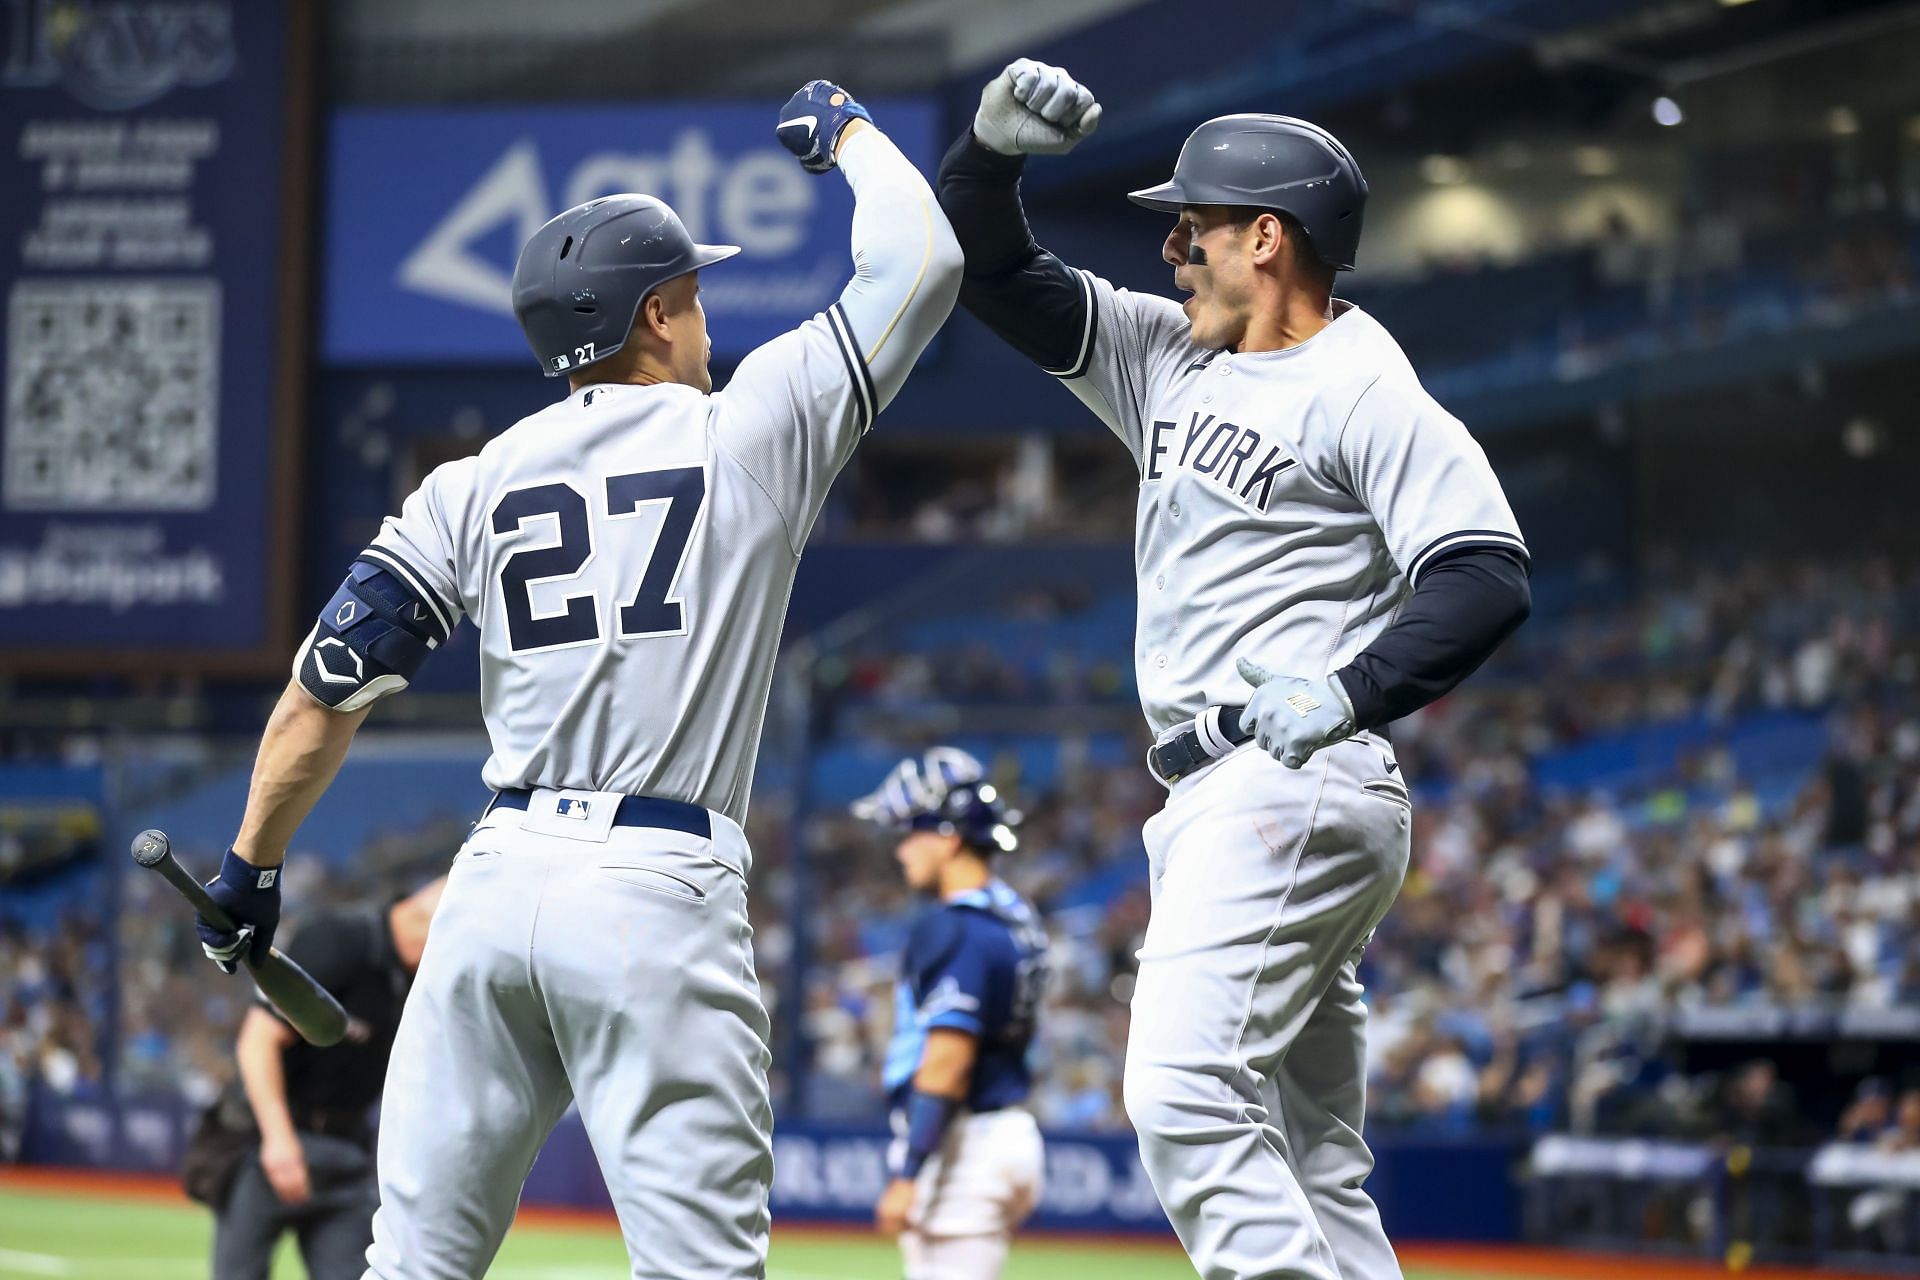 New York Yankees' Anthony Rizzo hits a solo home run off Toronto